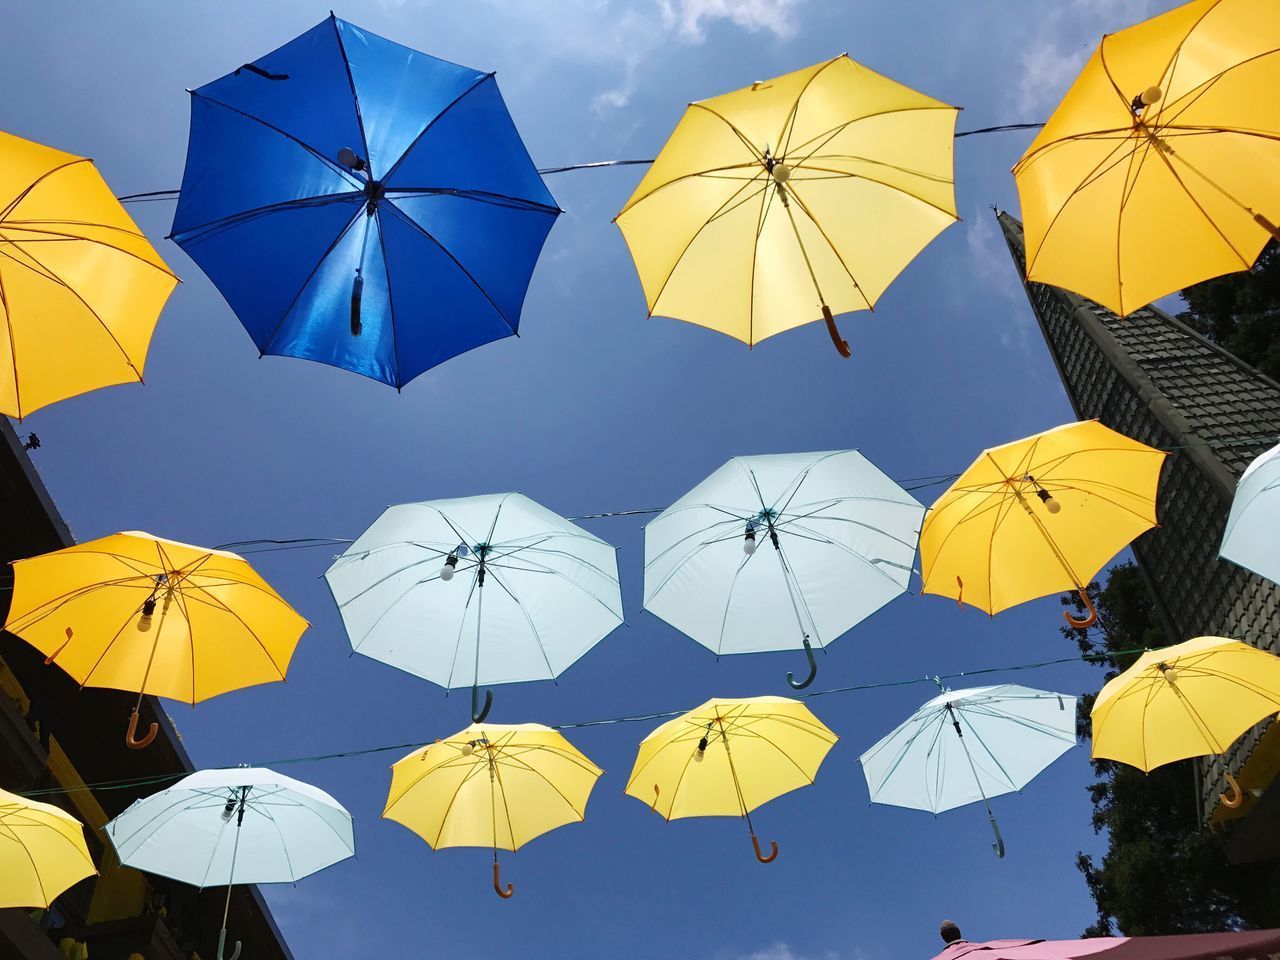 LOW ANGLE VIEW OF YELLOW UMBRELLA